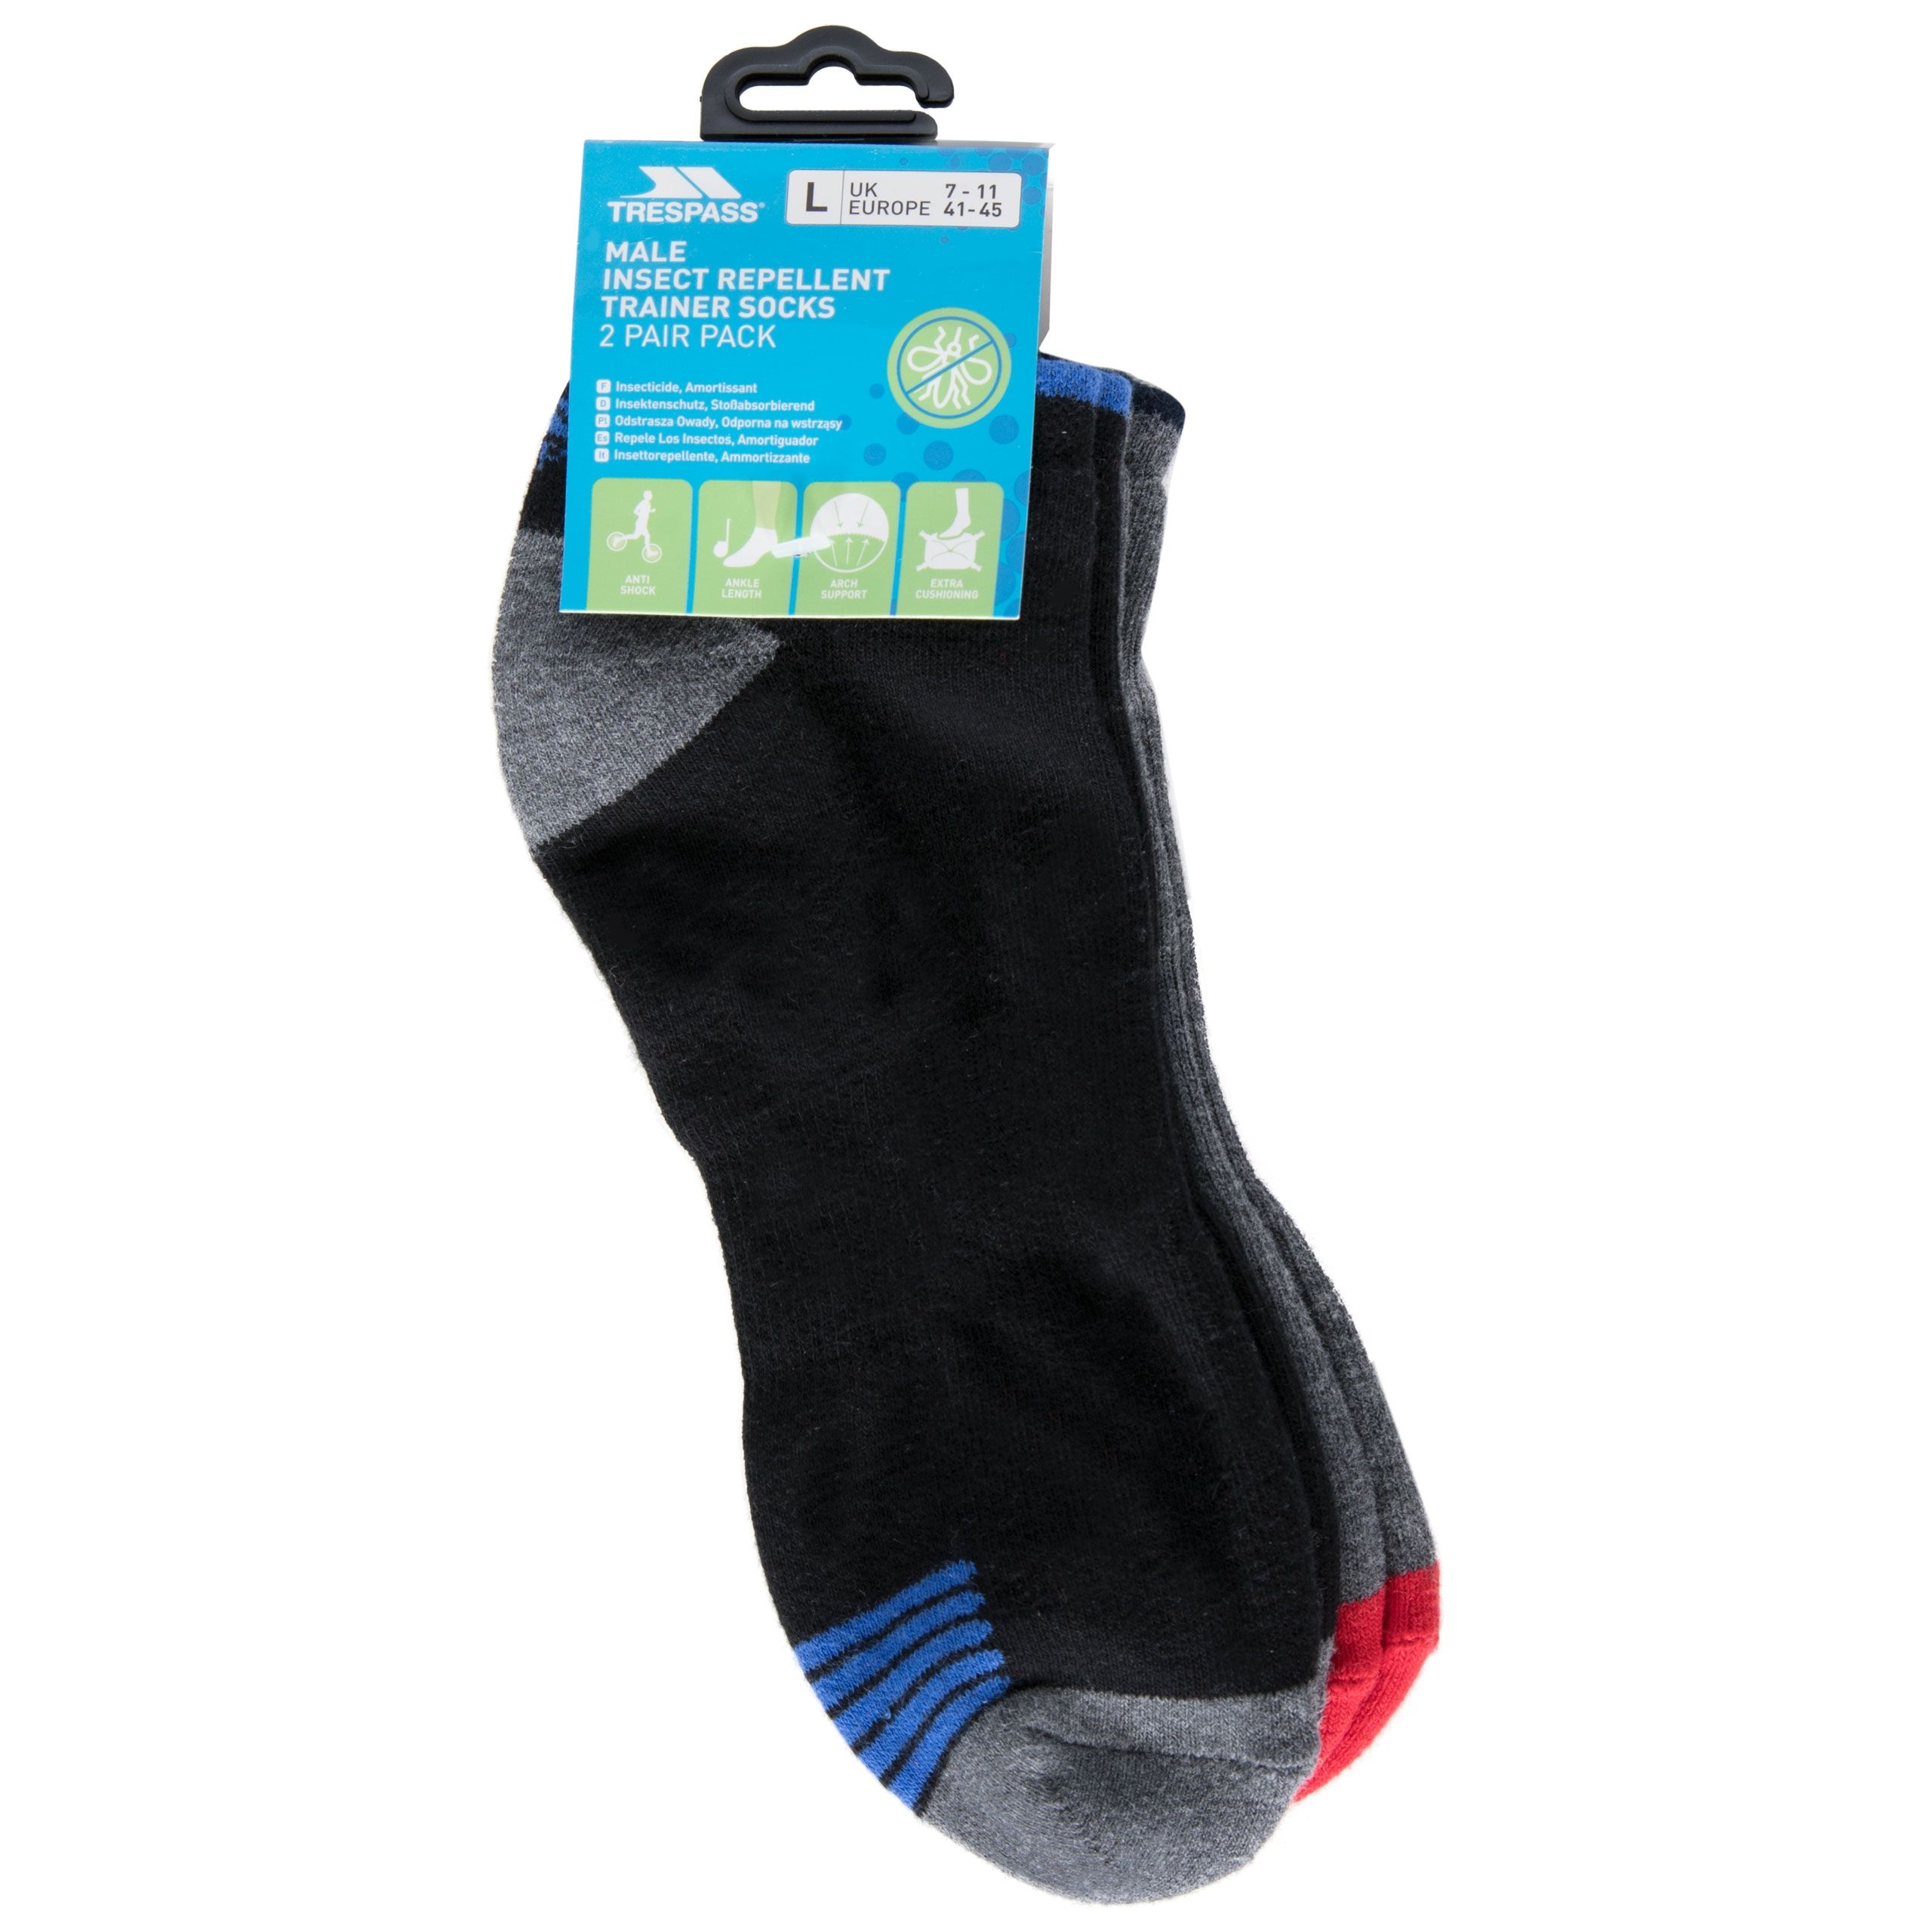 Tracked Mens Insect Repellent Trainer Socks - 2 Pack